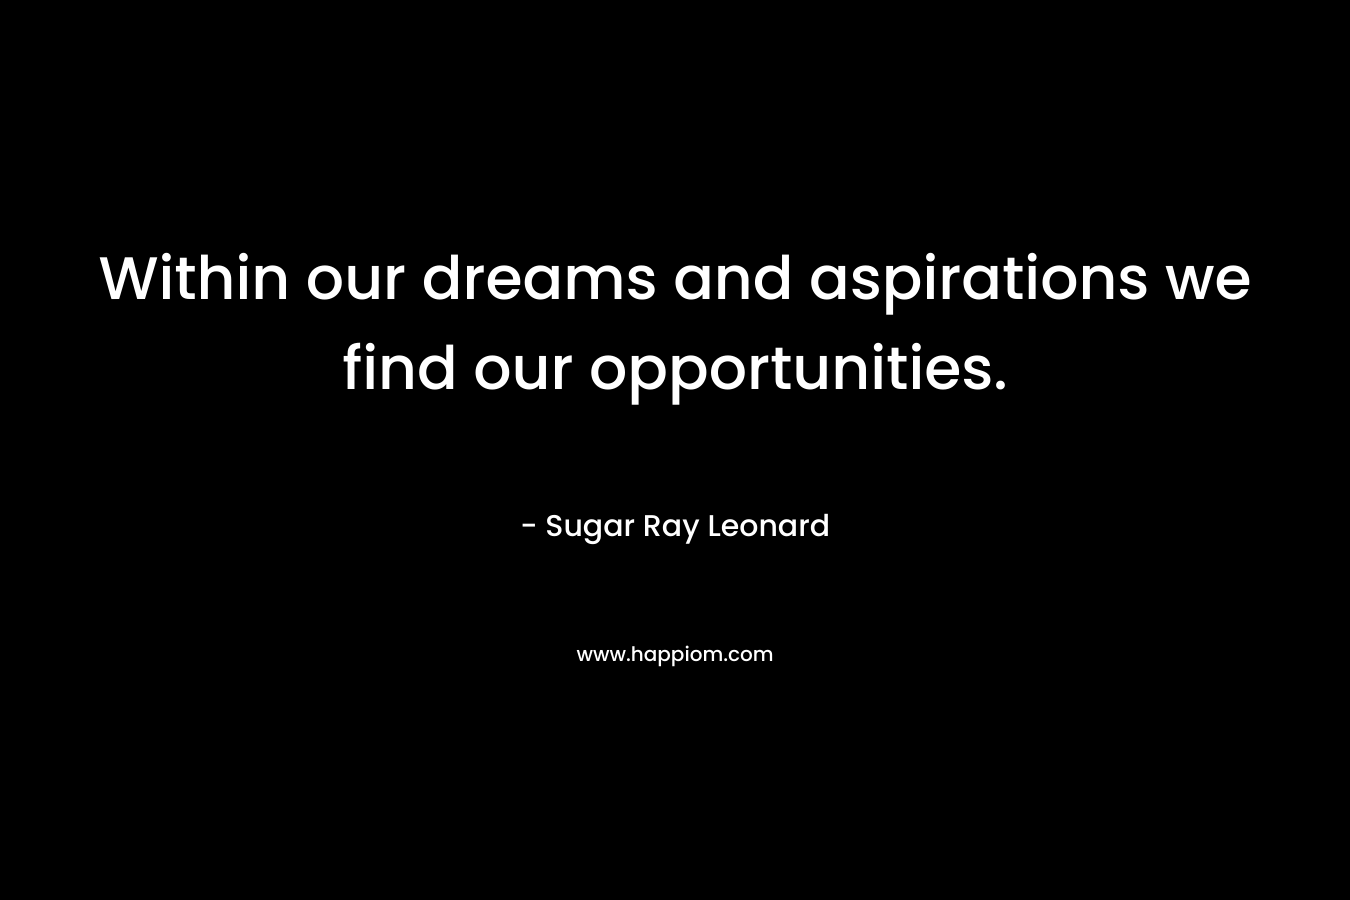 Within our dreams and aspirations we find our opportunities. – Sugar Ray Leonard